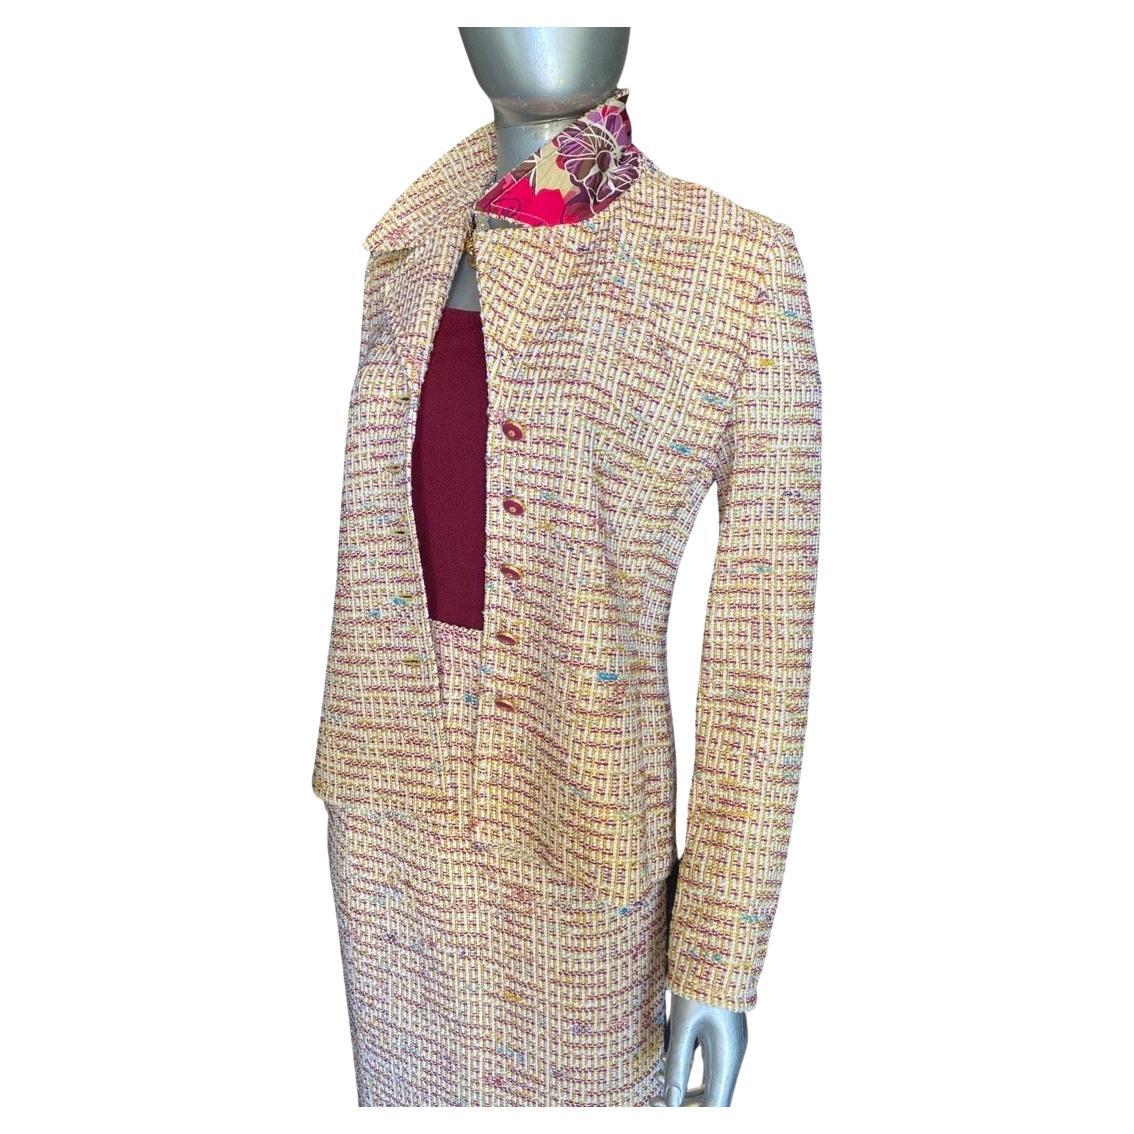 A beautiful suit by St. John Collection. Collection is the high end division, all european fabrics. Think bouclé like the famous french designer suit, but in a modern color knit. Creme, cranberry with a dash of turquoise. All the colors in the knit